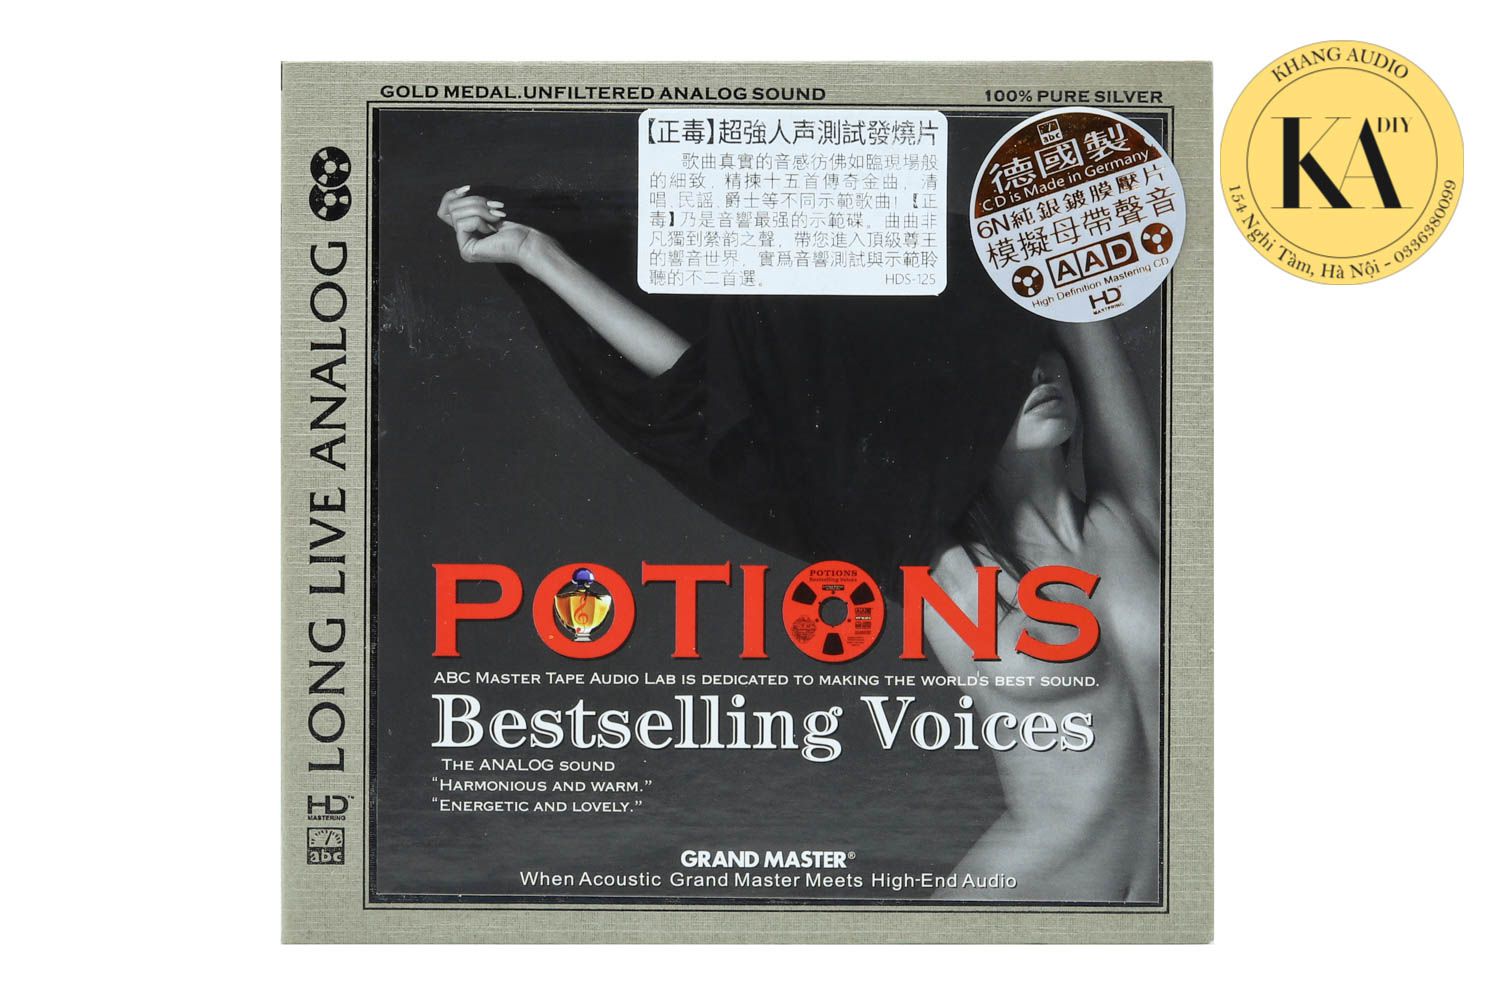 Potiond - Bestselling Voices Khang Audio 0336380099